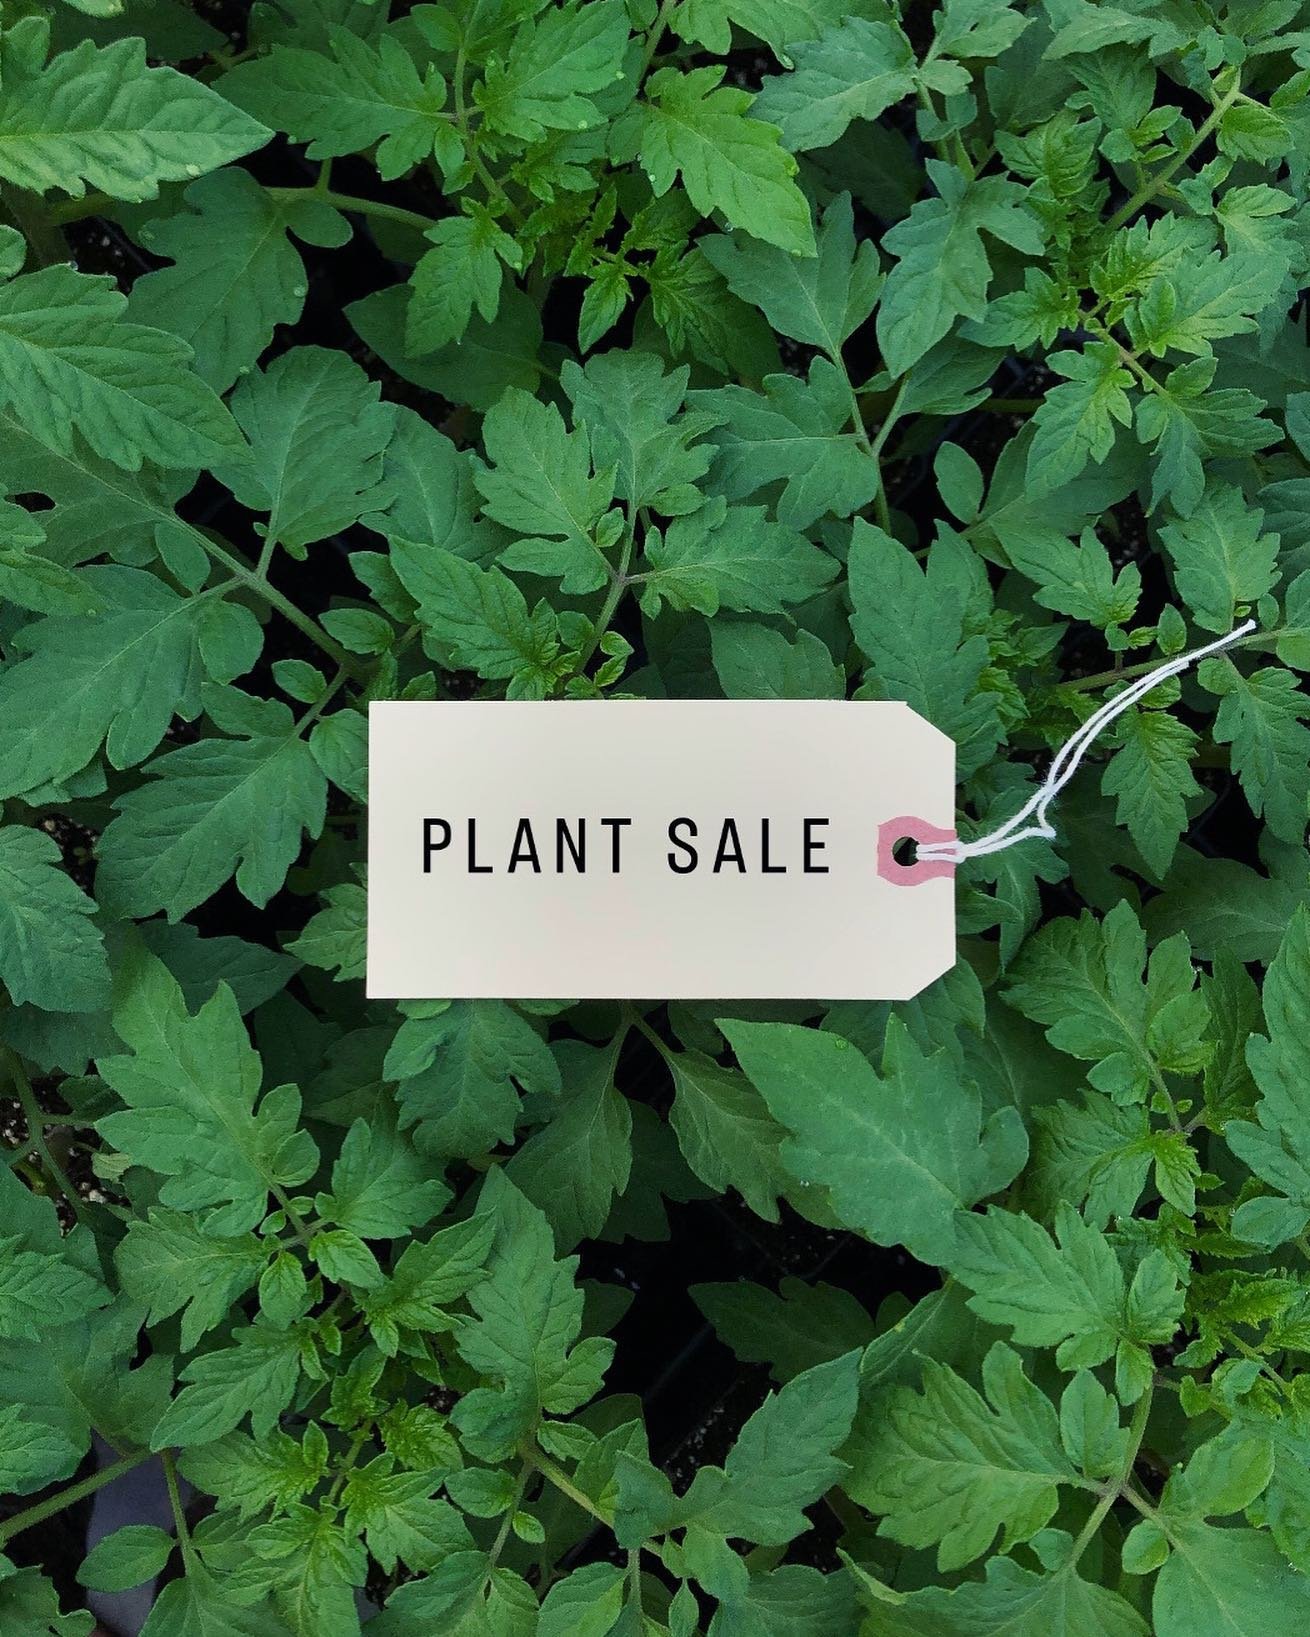 Join us for our annual Spring Plant Sale this Saturday, May 18th from 9-3 here on the farm in Troy, NY! Get everything you need for your vegetable, herb or flower garden. The plants are so healthy and perfect this year, come on out!!